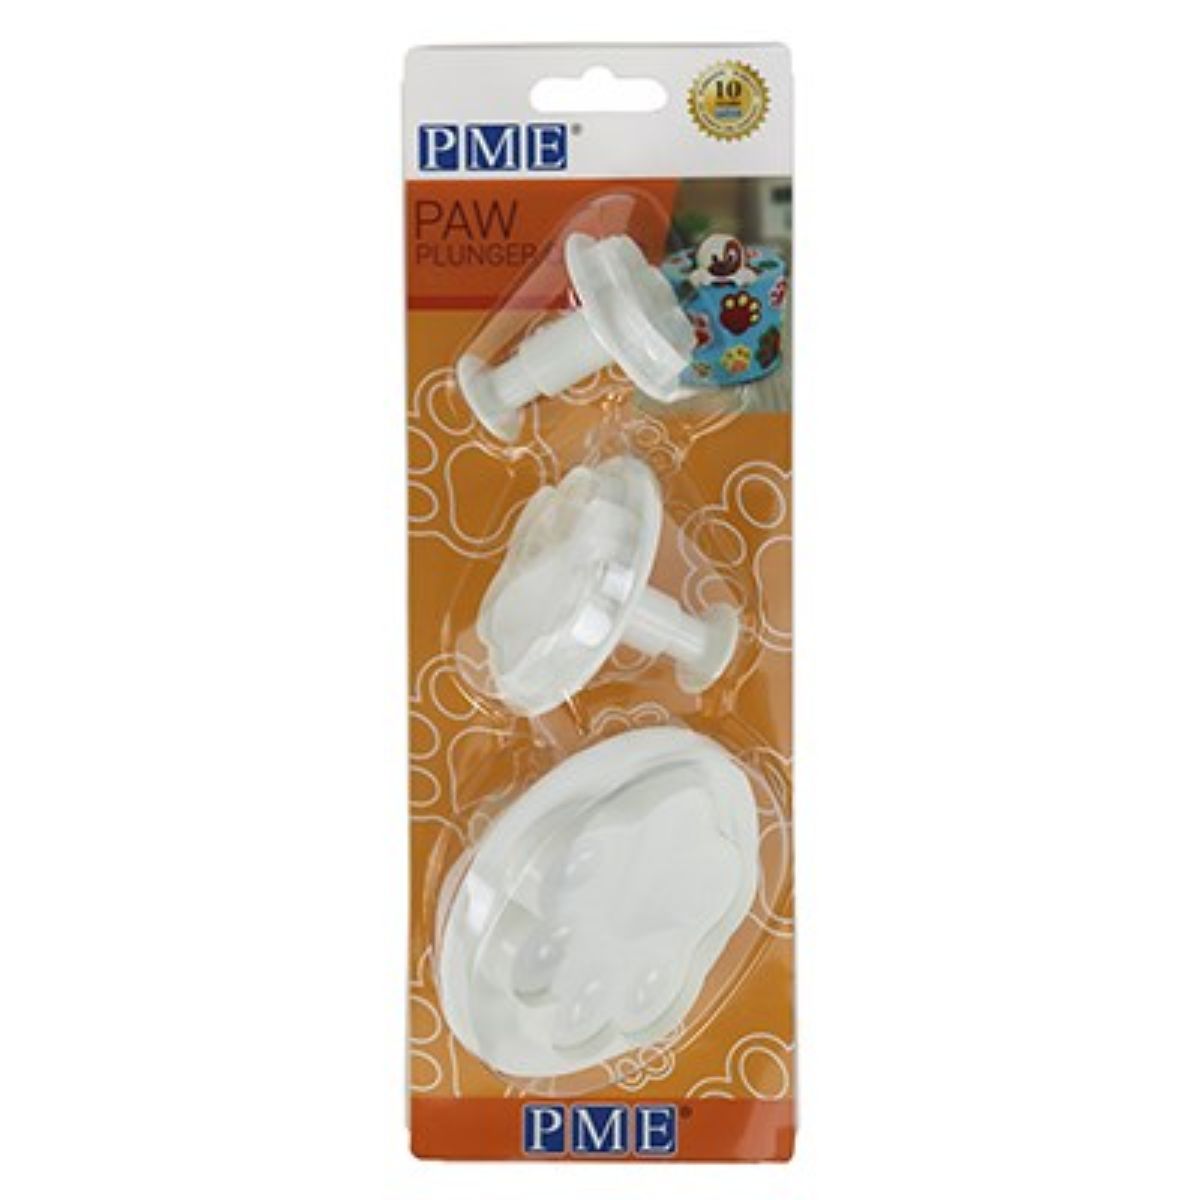 PME Paw Plunger Cutter Set of 3